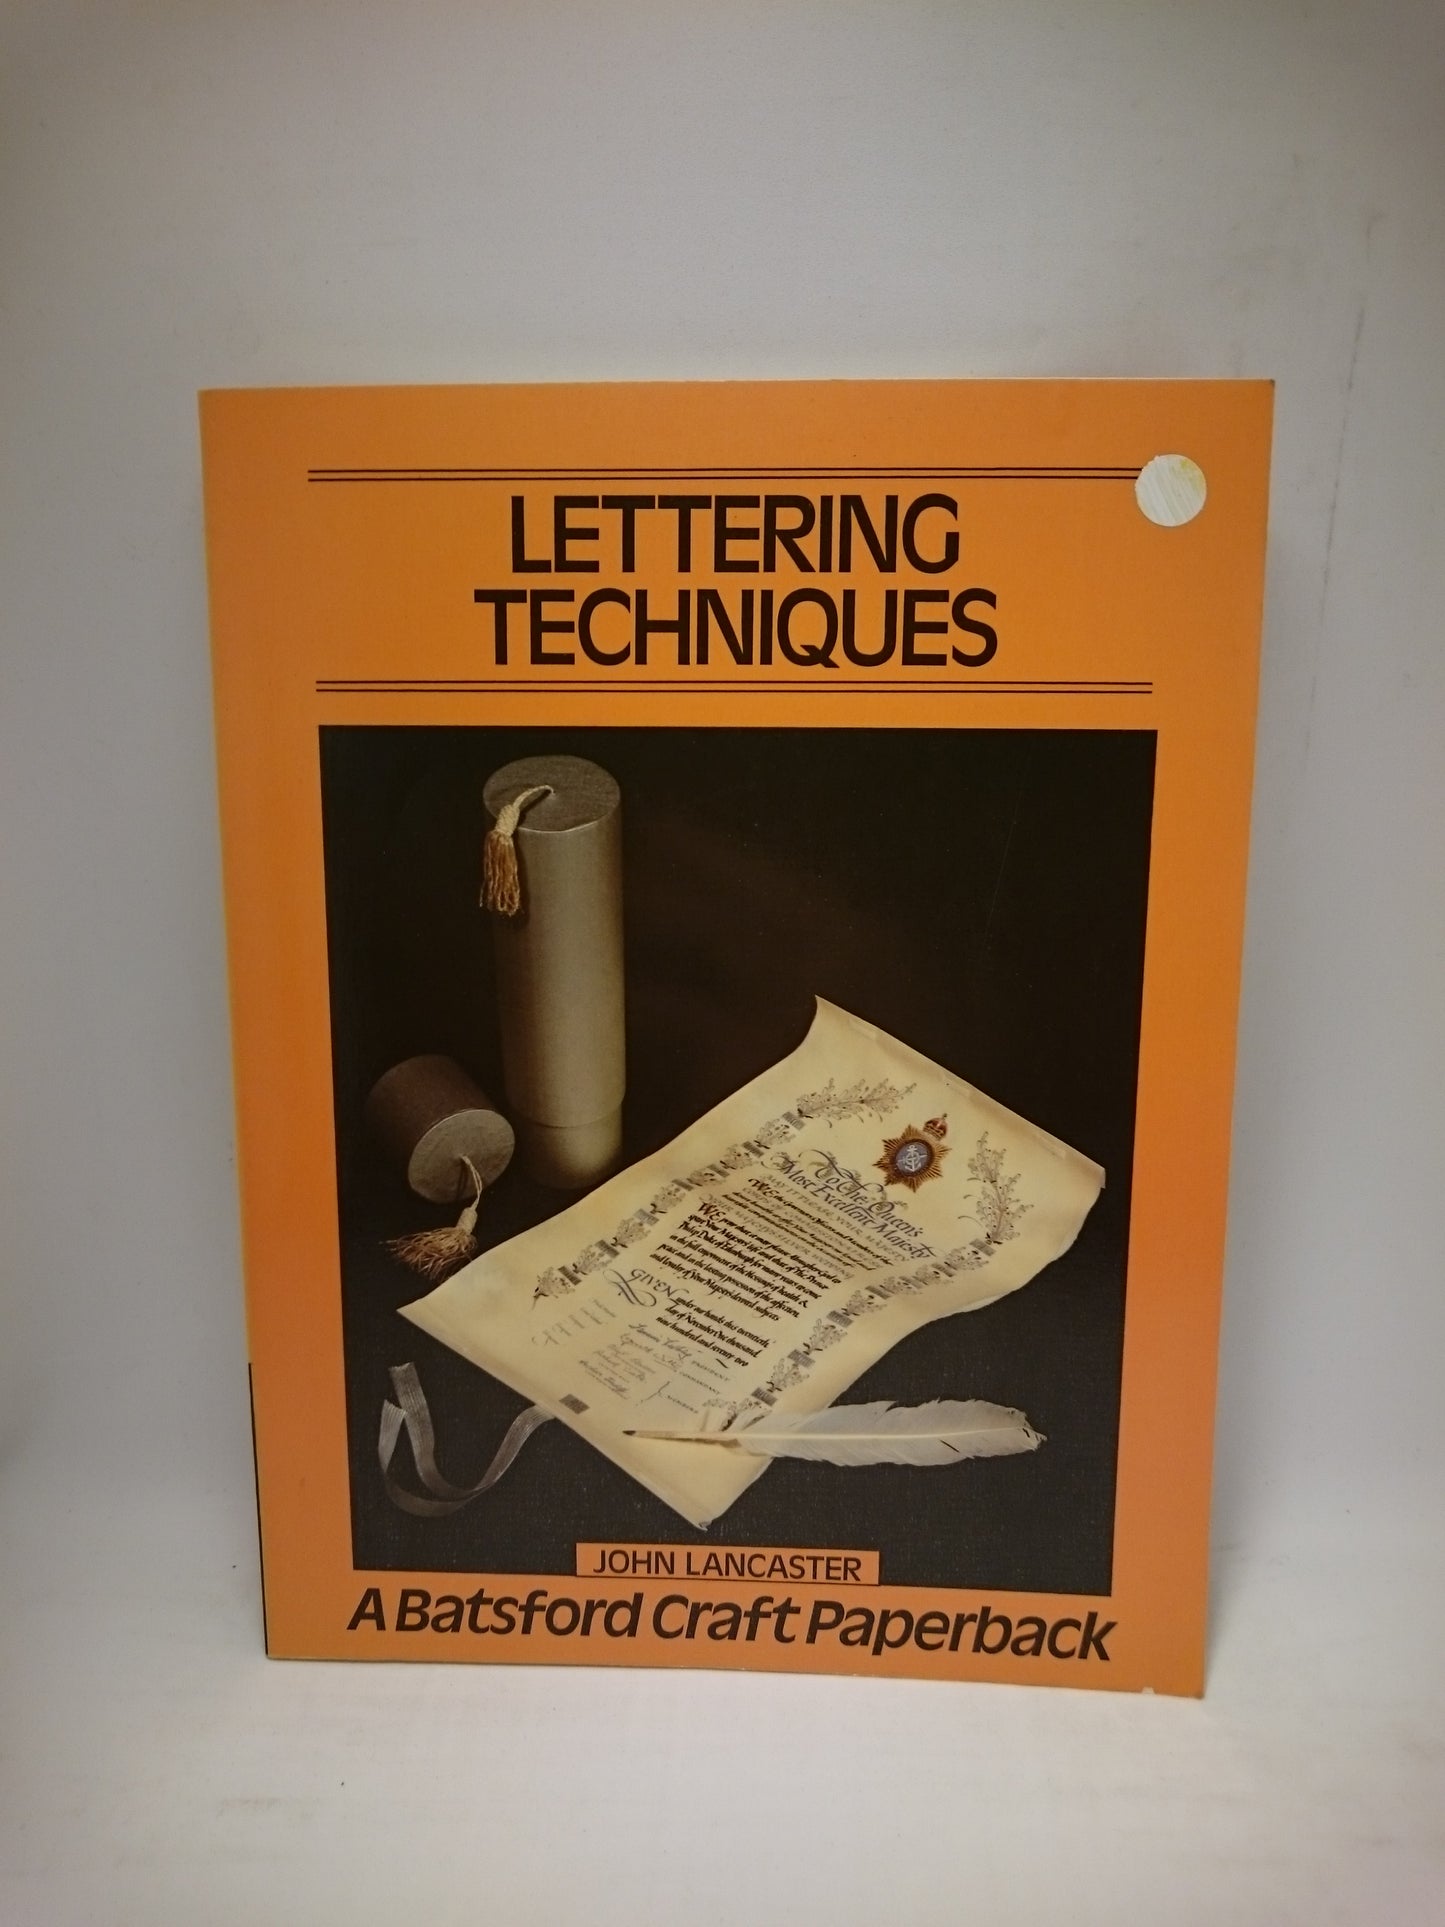 Lettering Techniques (A Batsford Craft Paperback) (Craft Paperbacks)